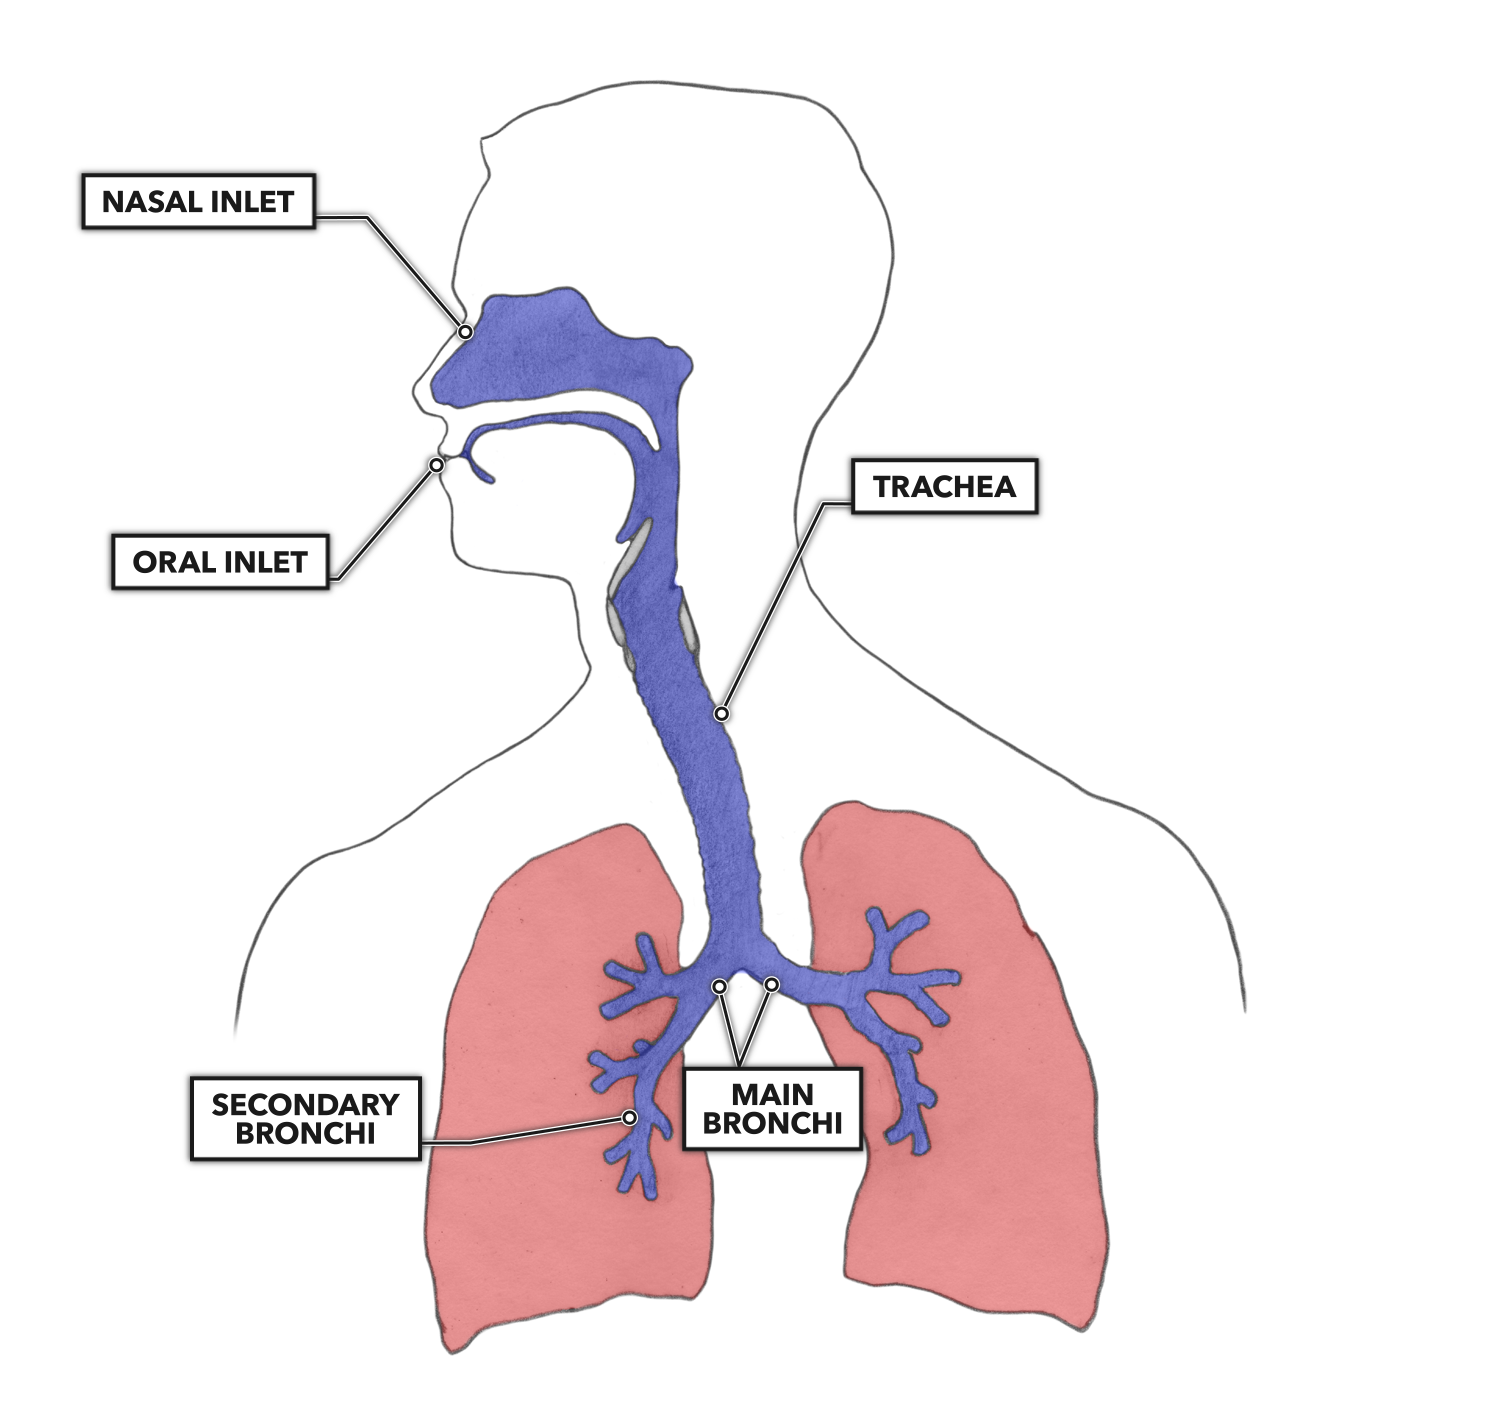 Crossfit Lung Anatomy The Airway And Alveoli